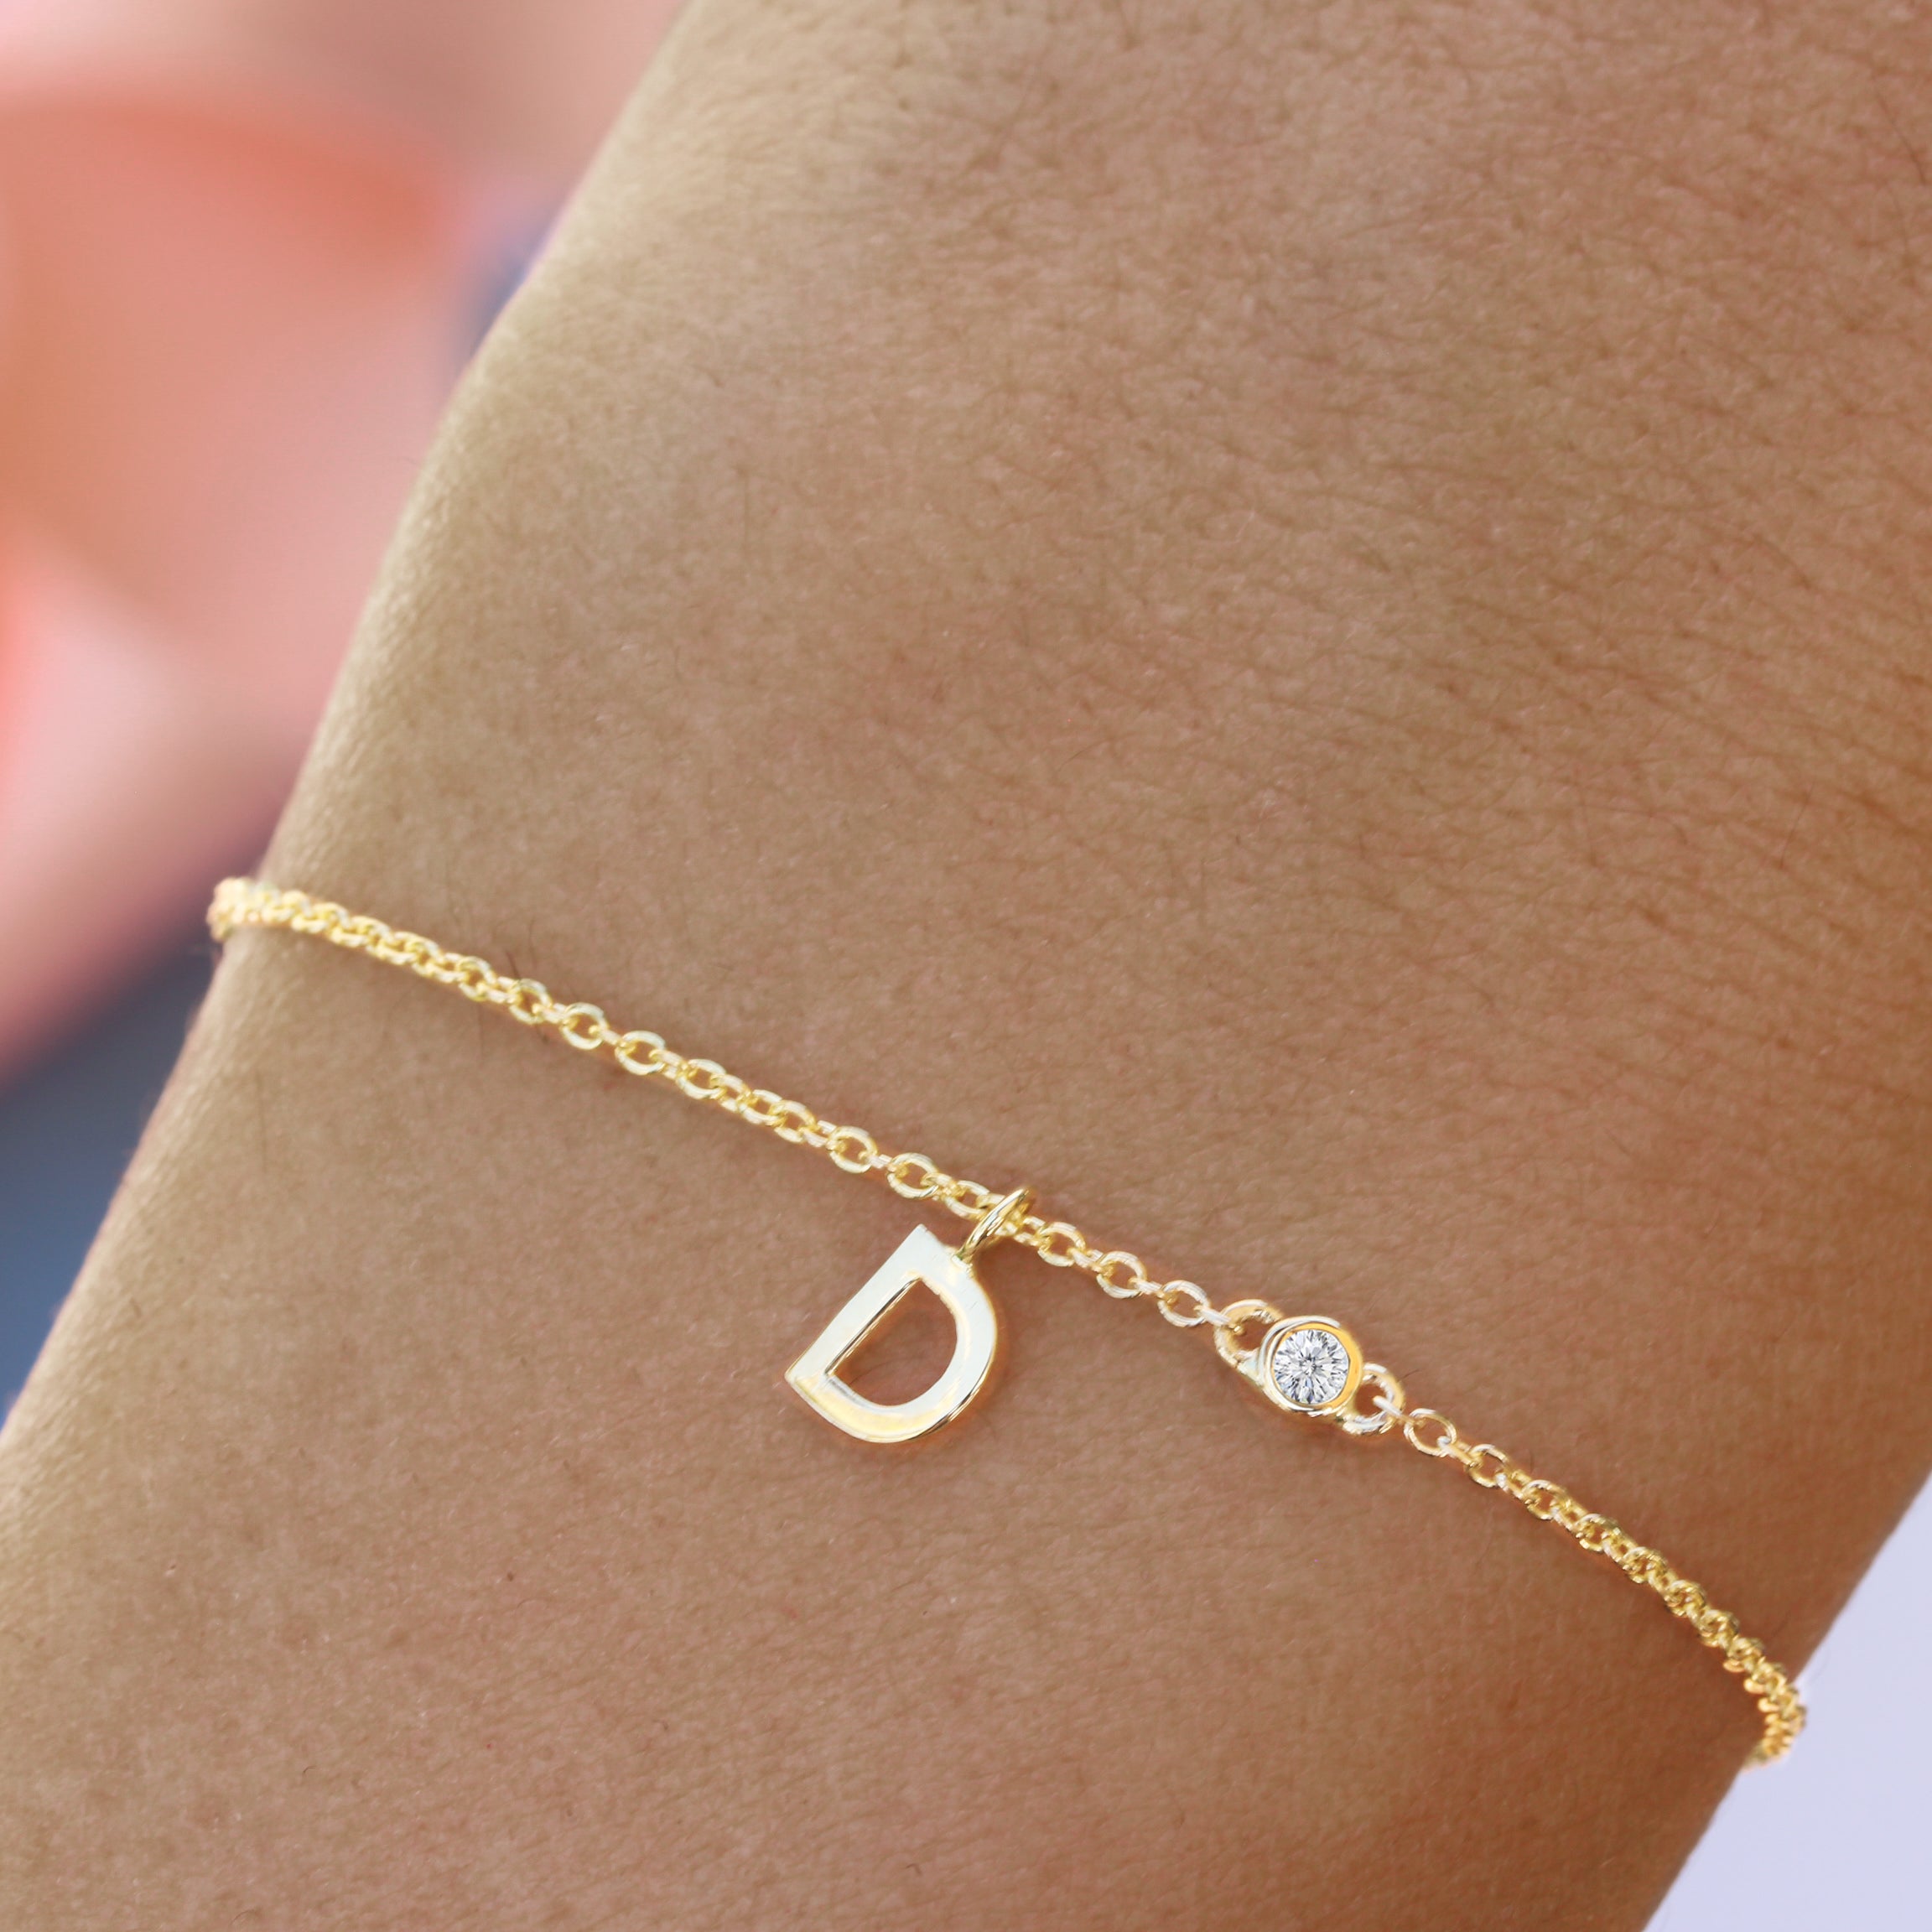 Mini Initial Letter Personalized Bracelet / Necklace 14K Gold with Diamond / Birthstone